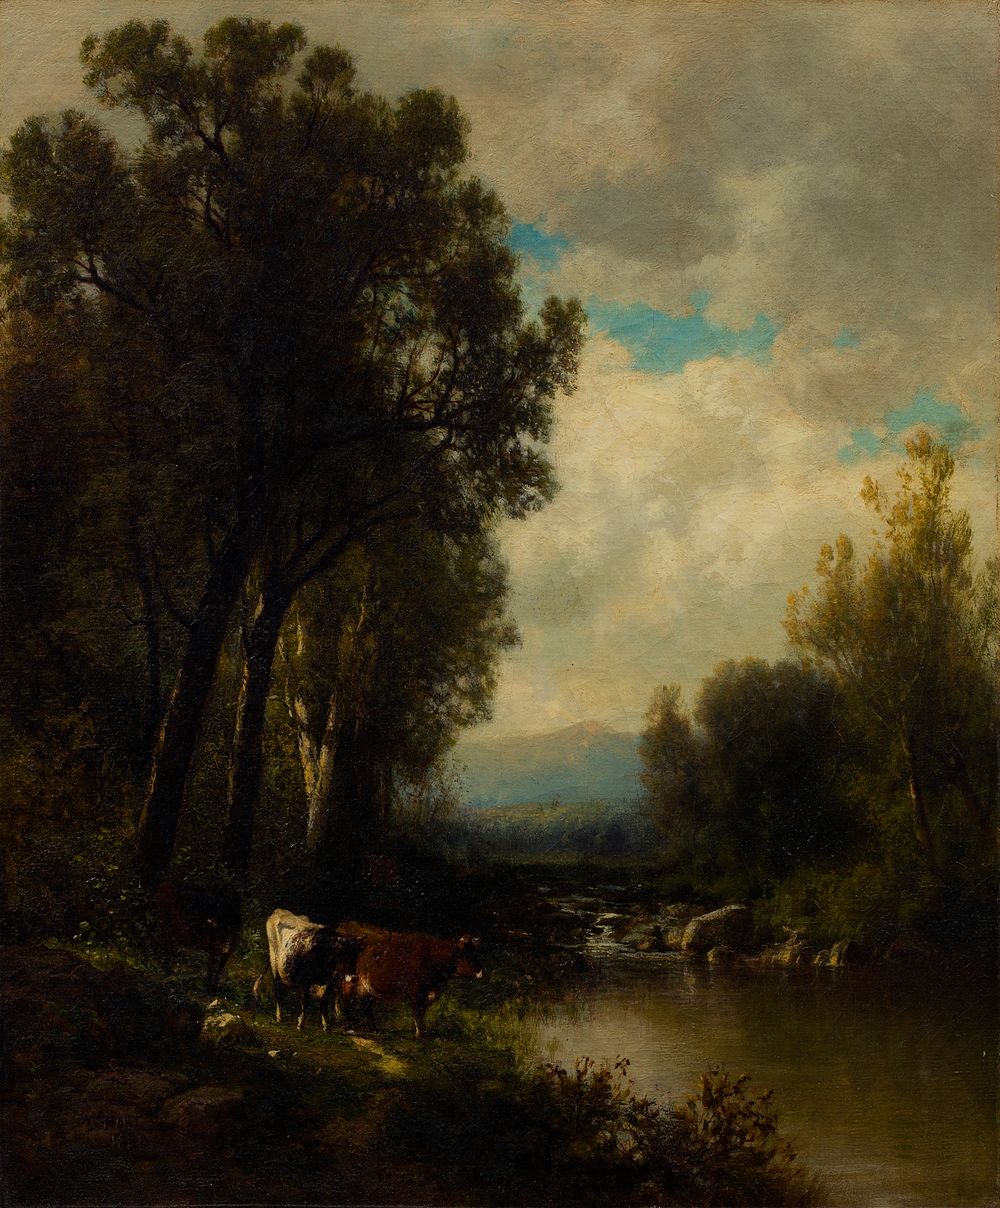 Cattle on the River